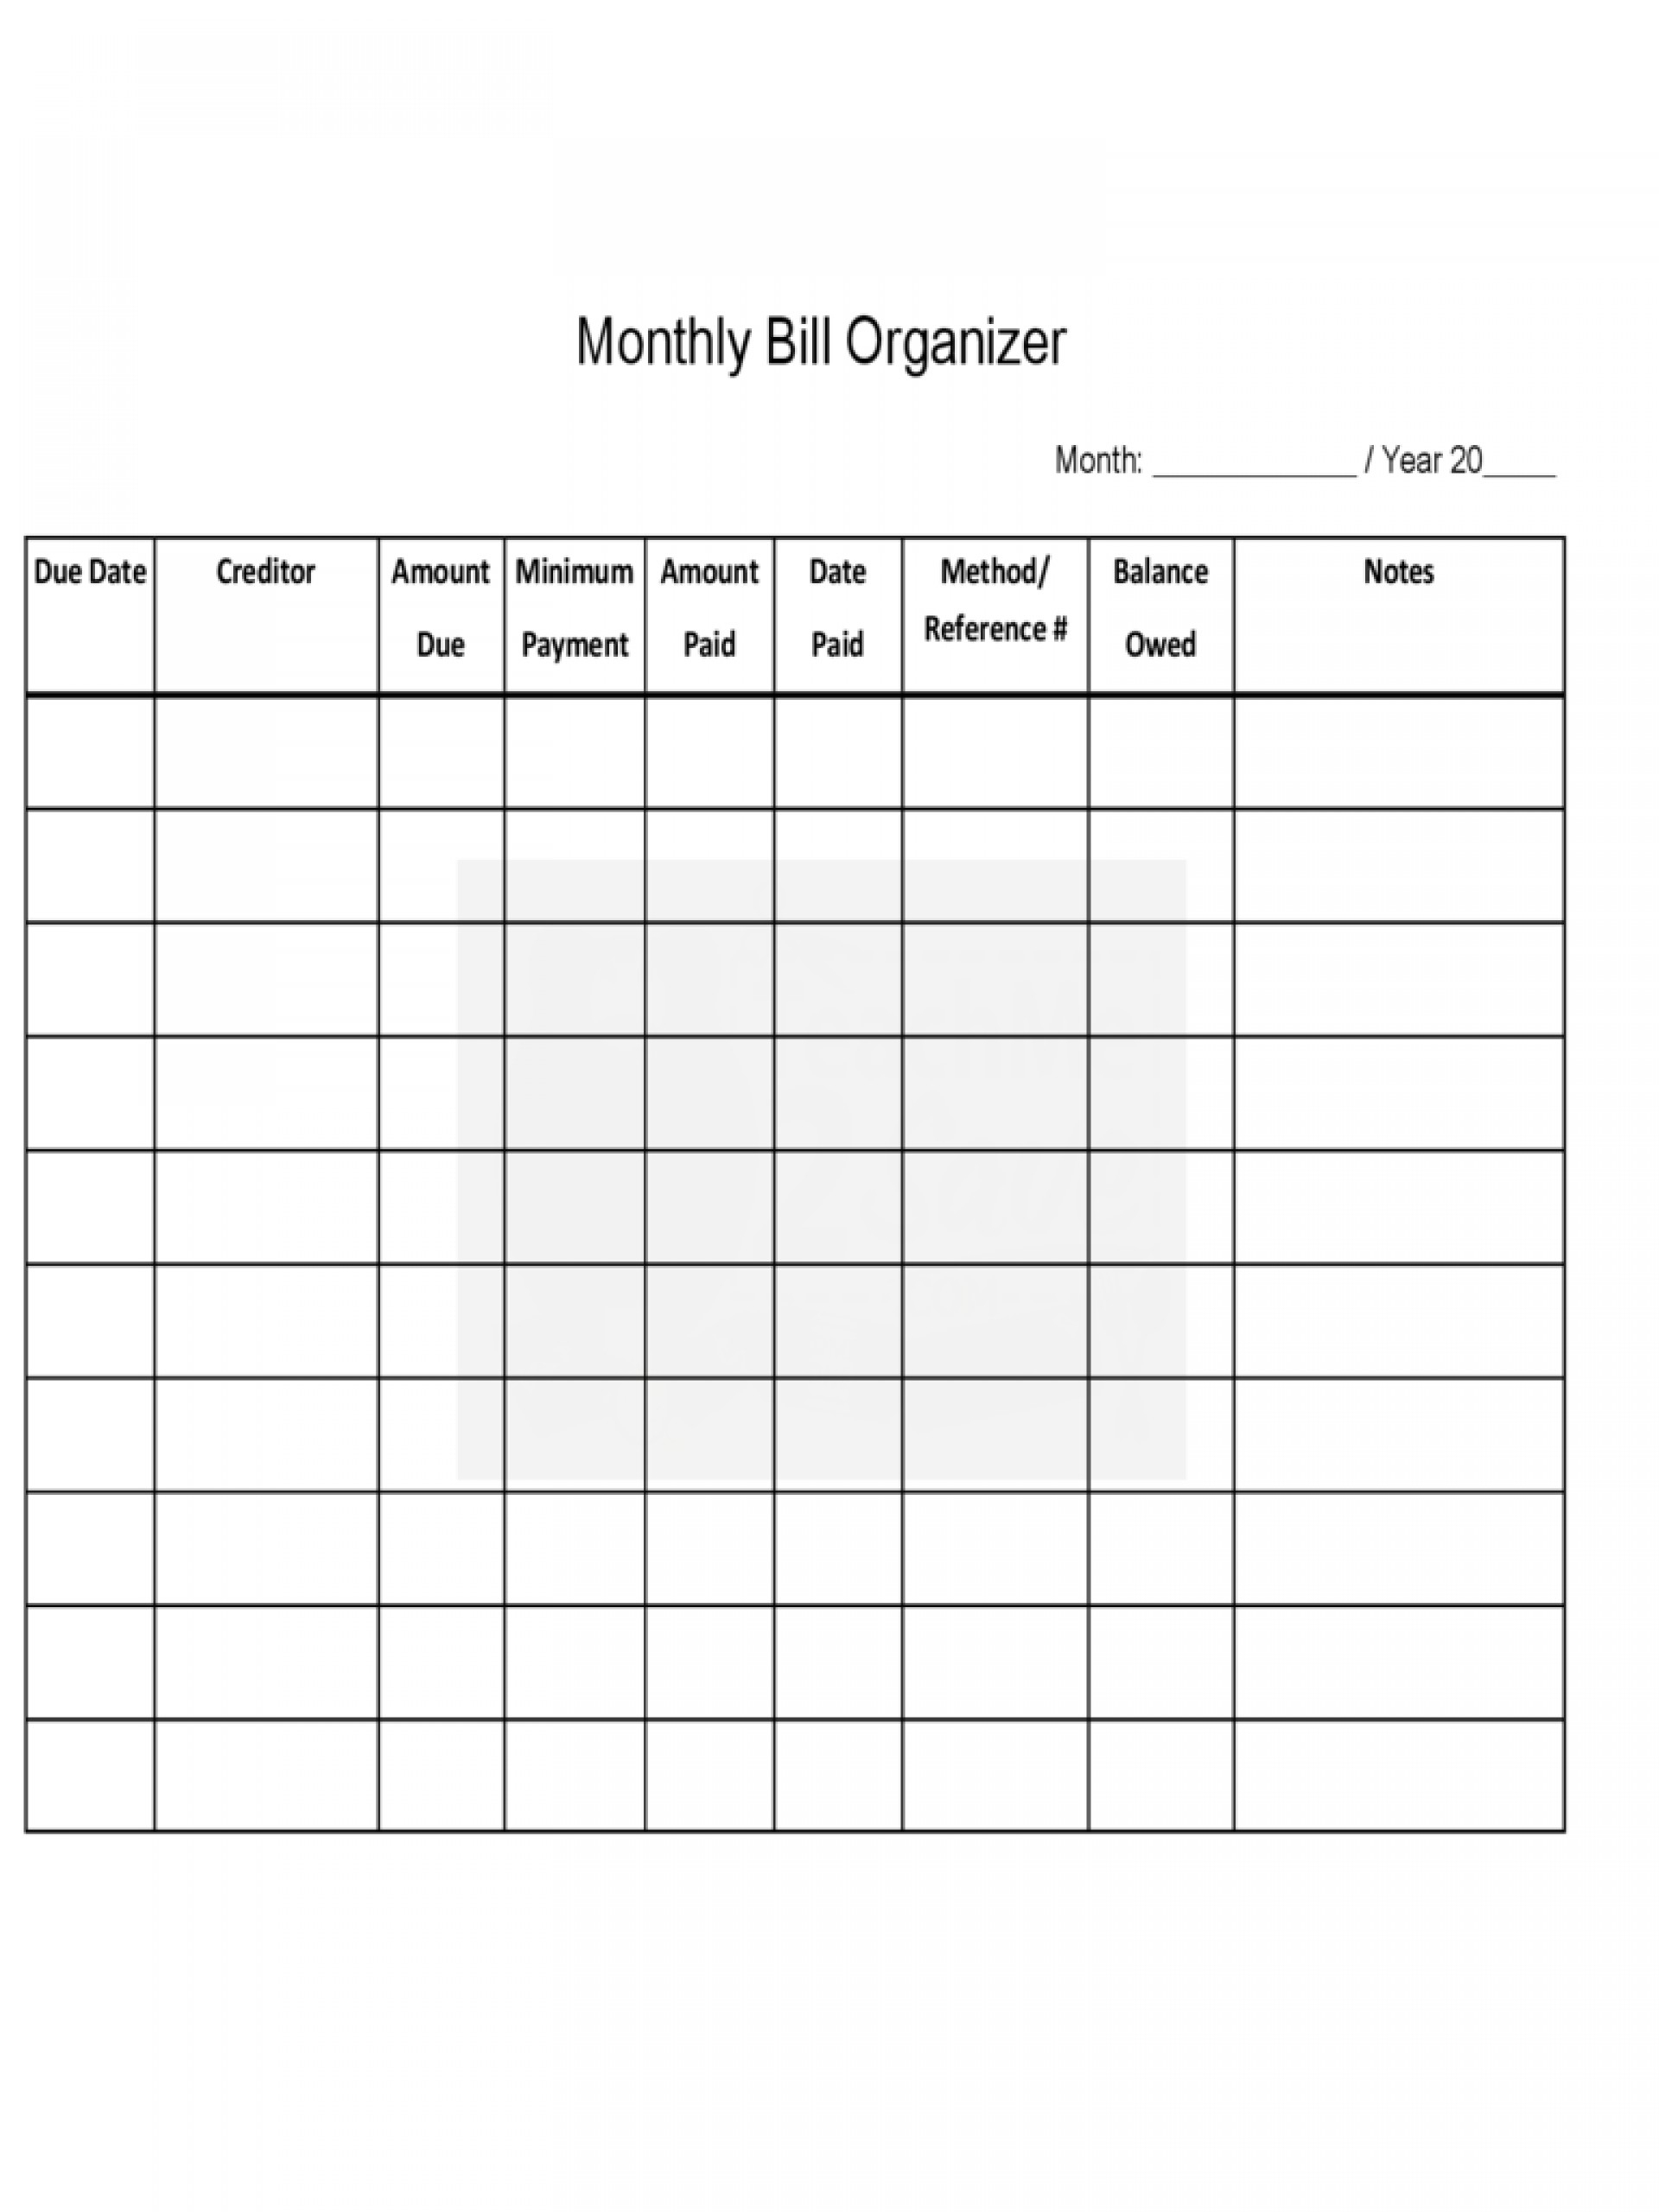 Monthly Payment Spreadsheet Koran sticken co Free Printable Monthly Bill Payment Worksheet 